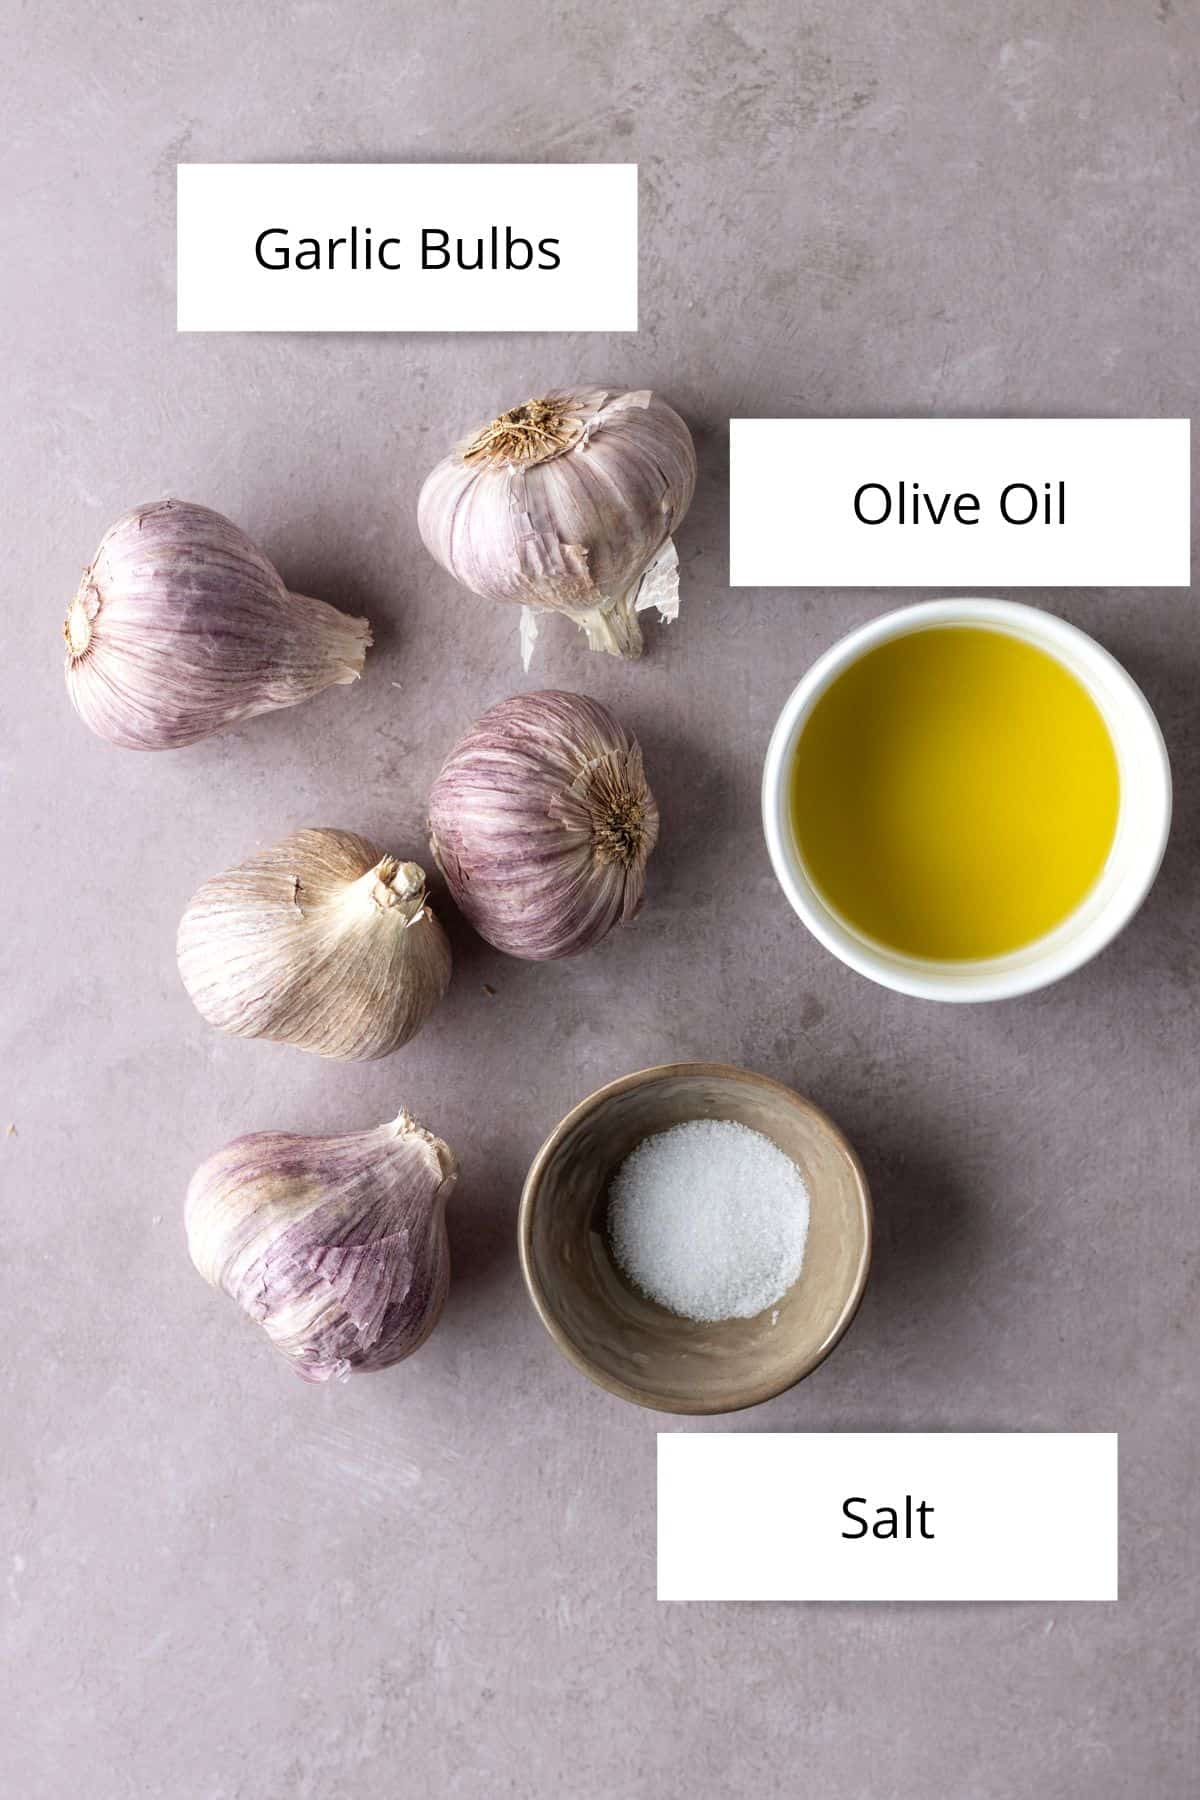 Five whole garlic bulbs, a white bowl of olive oil and a tan bowl of salt.